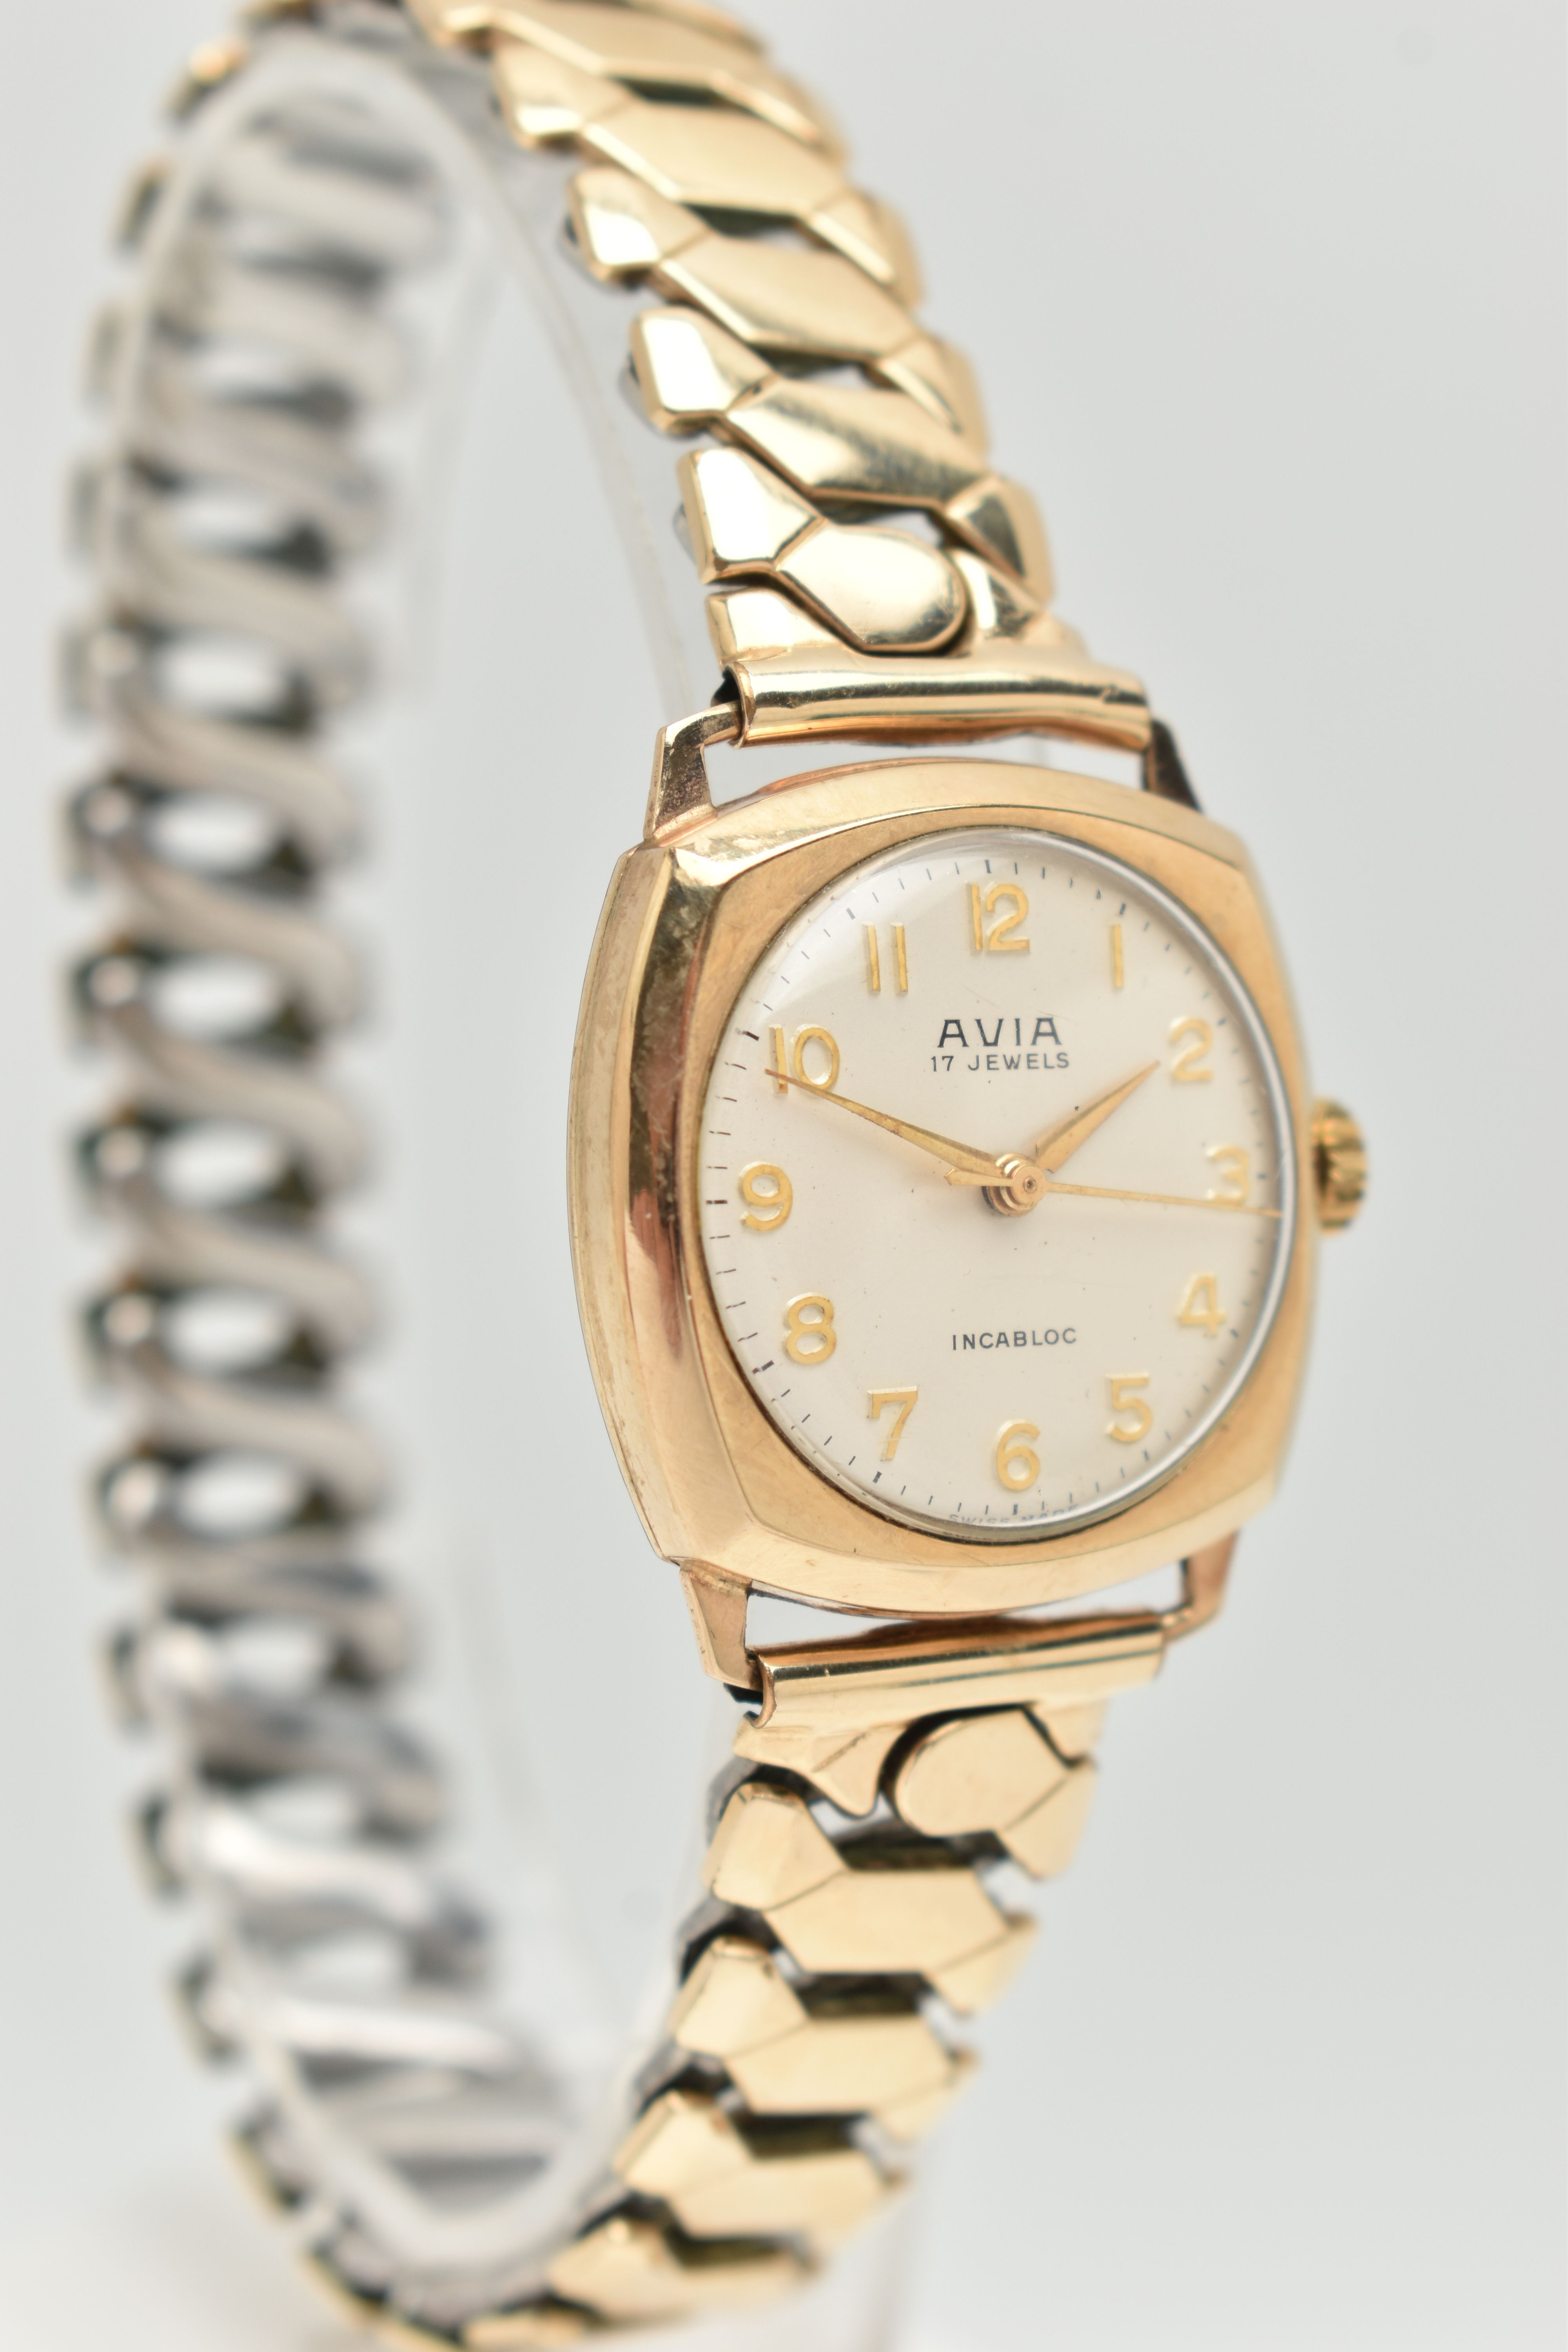 A 9CT GOLD 'AVIA' WRISTWATCH, manual wind, round silver dial signed 'Avia 17 Jewels, Incabloc', - Image 2 of 6